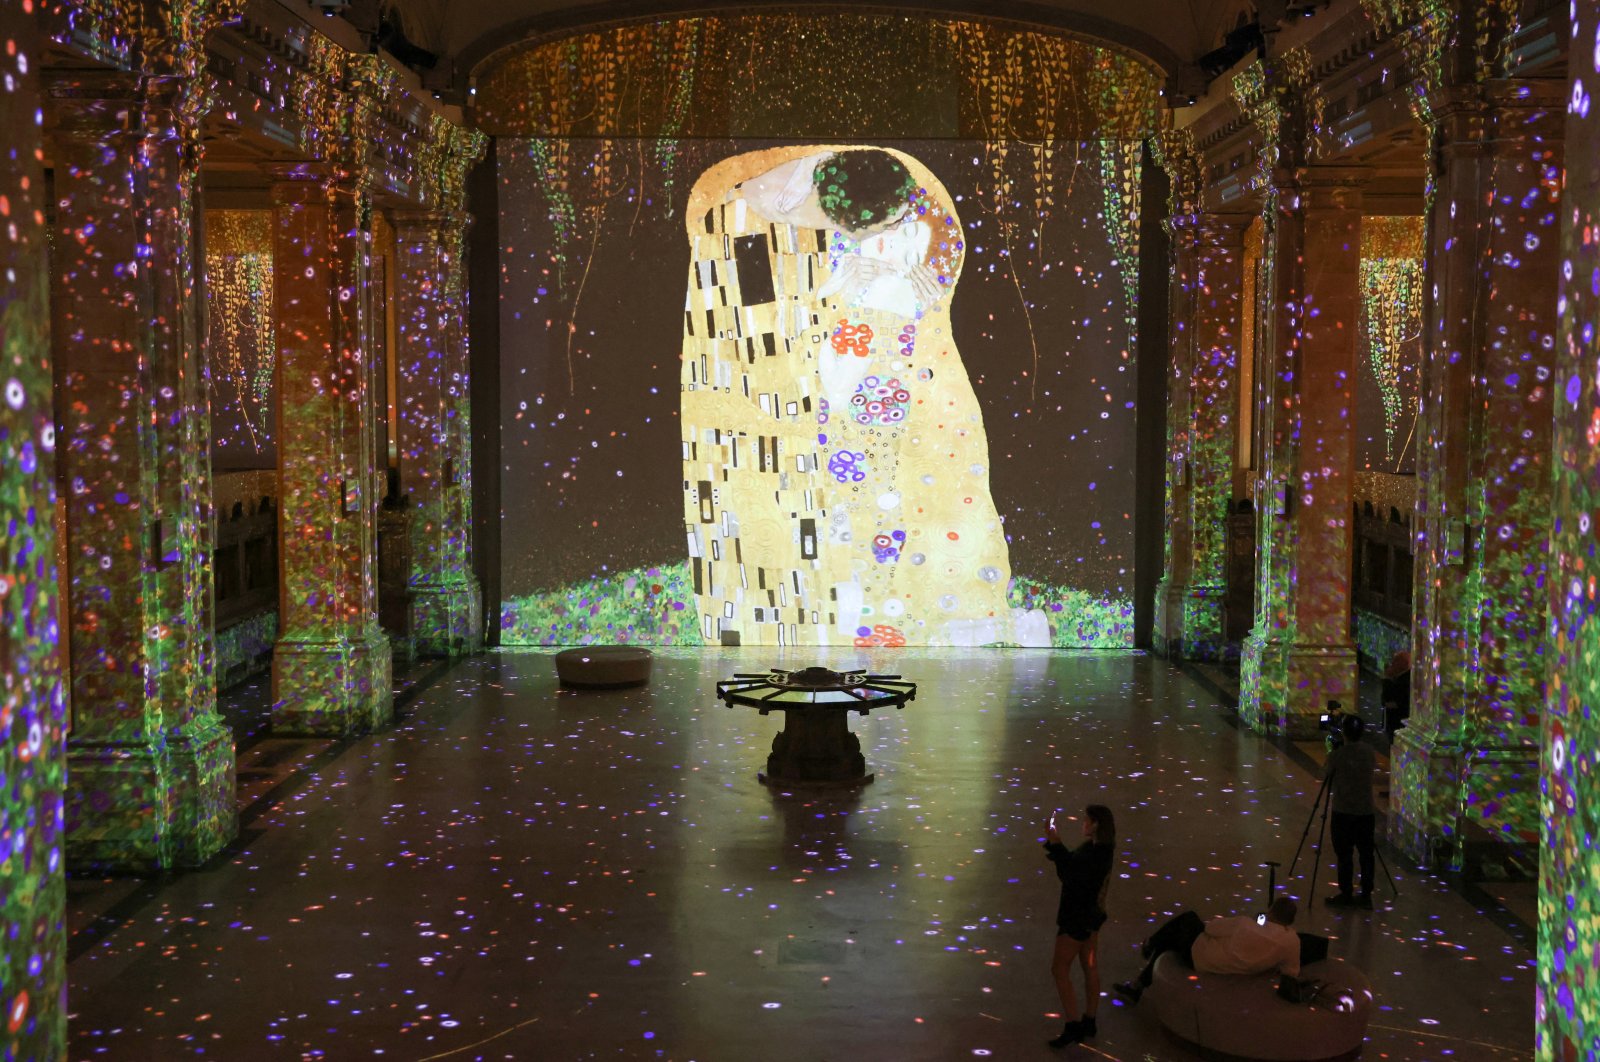 Members of the media attend a press preview for Hall des Lumieres, a new permanent center for immersive digital art featuring the exhibition "Gustav Klimt: Gold in Motion" in Manhattan, New York City, U.S., Sept. 13, 2022.  (REUTERS Photo)